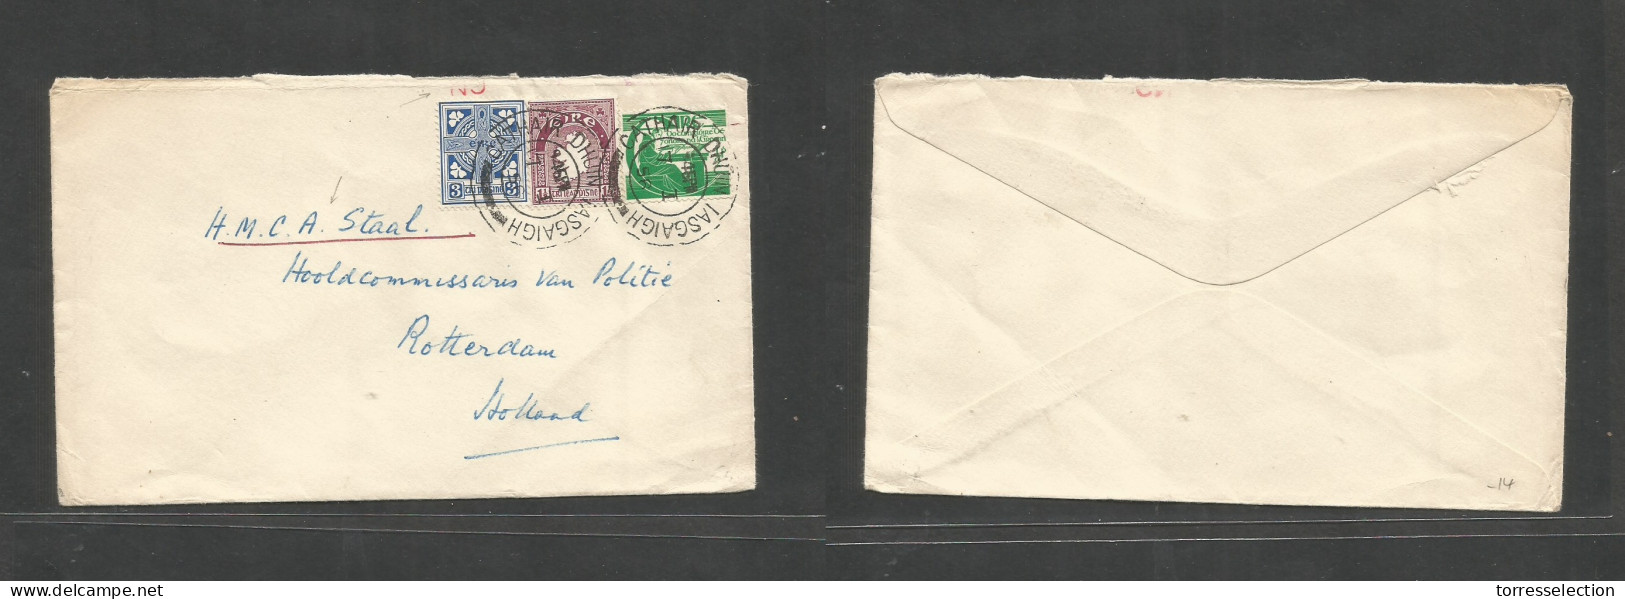 EIRE. 1956 (7 Jan) Cathair Dhuin Lasgaigh - Netherlands, Rotterdan. Multifkd Env "NO" Red Mark. HMCA Steal". VF. - Used Stamps